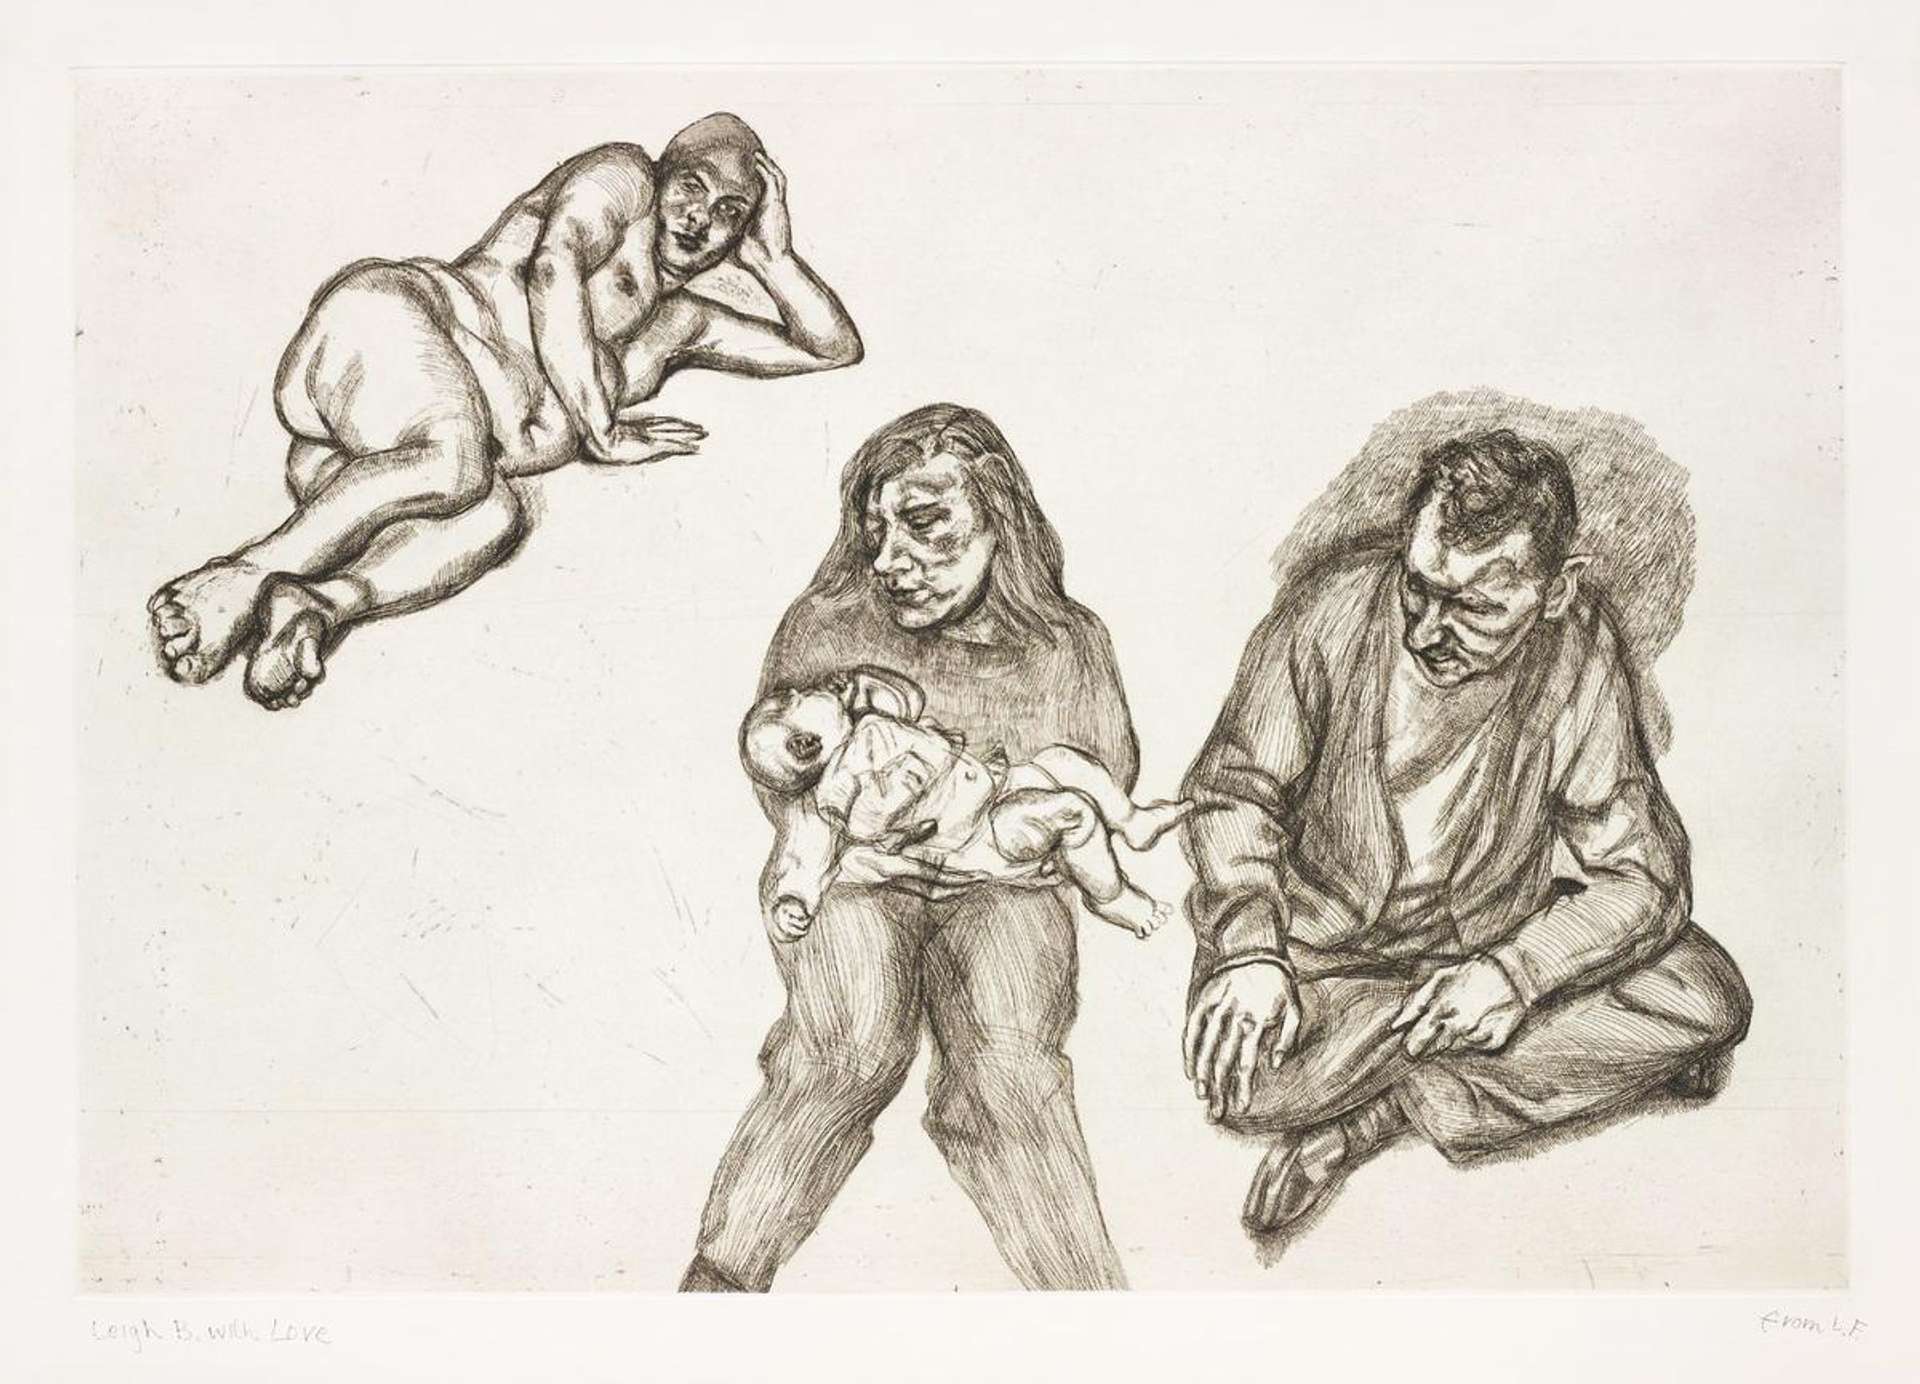 An image of the print Four Figures by Lucian Freud. It shows four human figures, one of which is nude, the other a mother with her baby, and finally a fully clothed man. The sketch is done in monochrome.